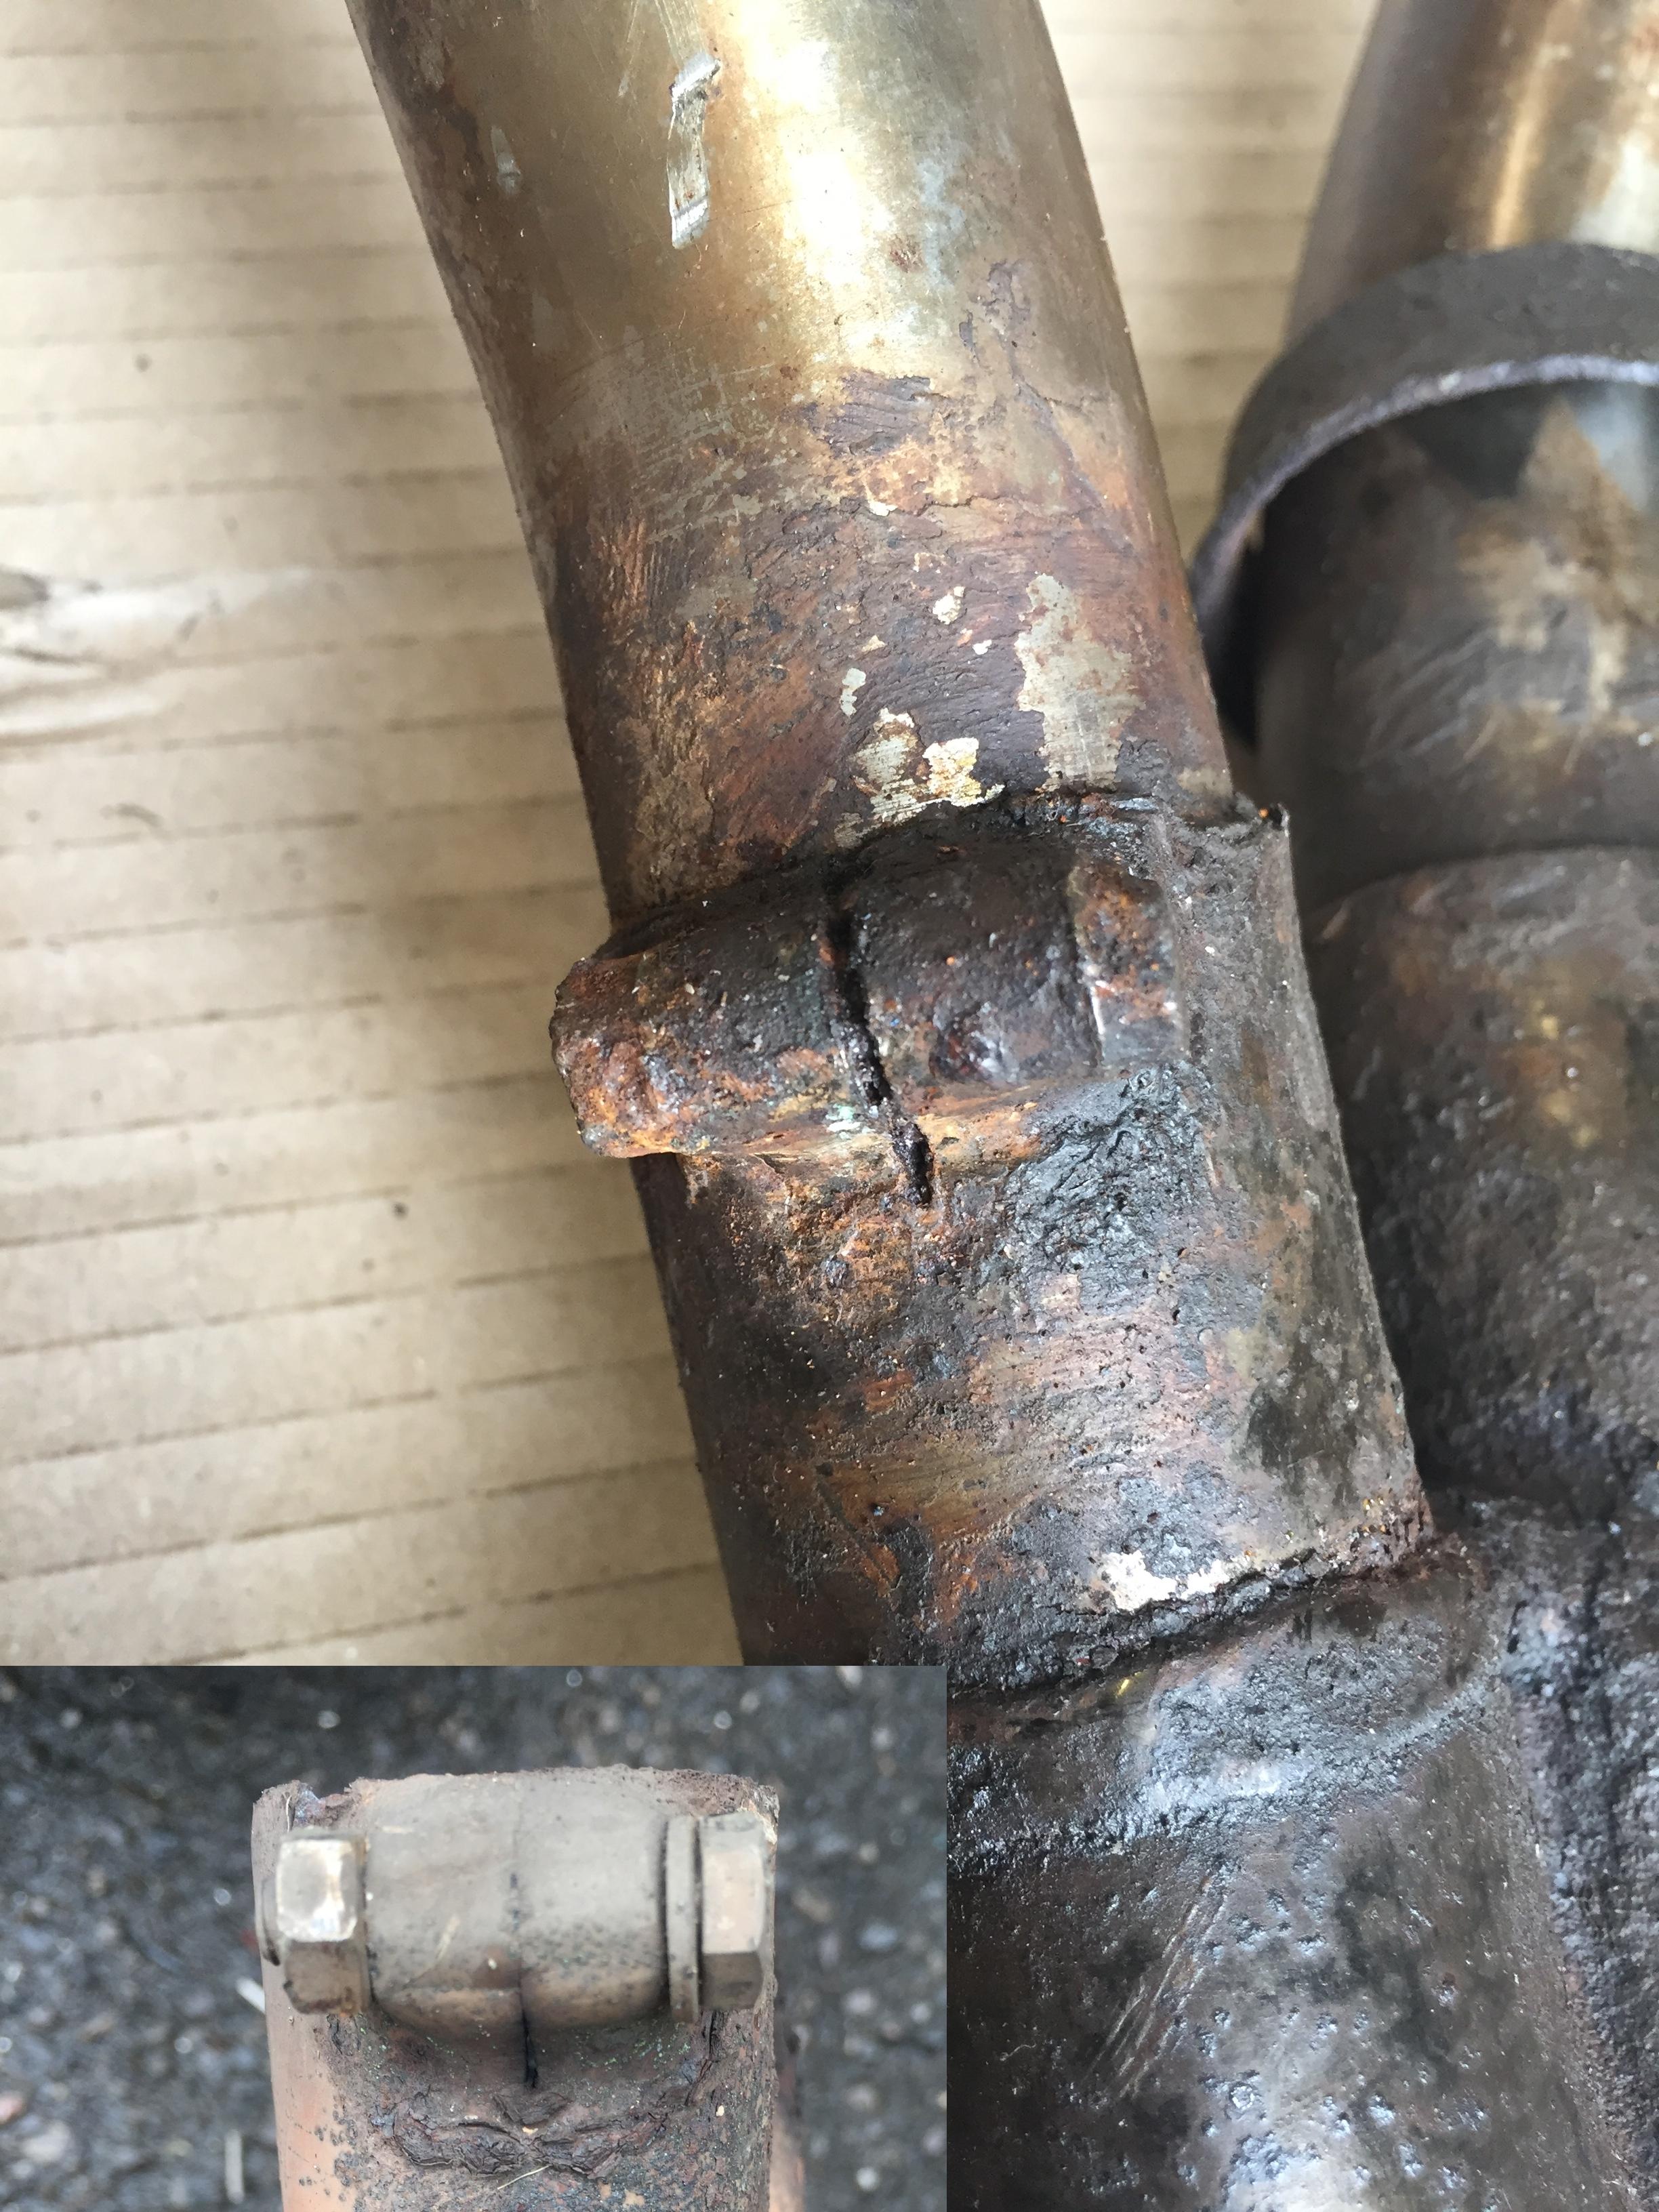 Advice for removing this heavily rusted bolt? (bottom left is what ...